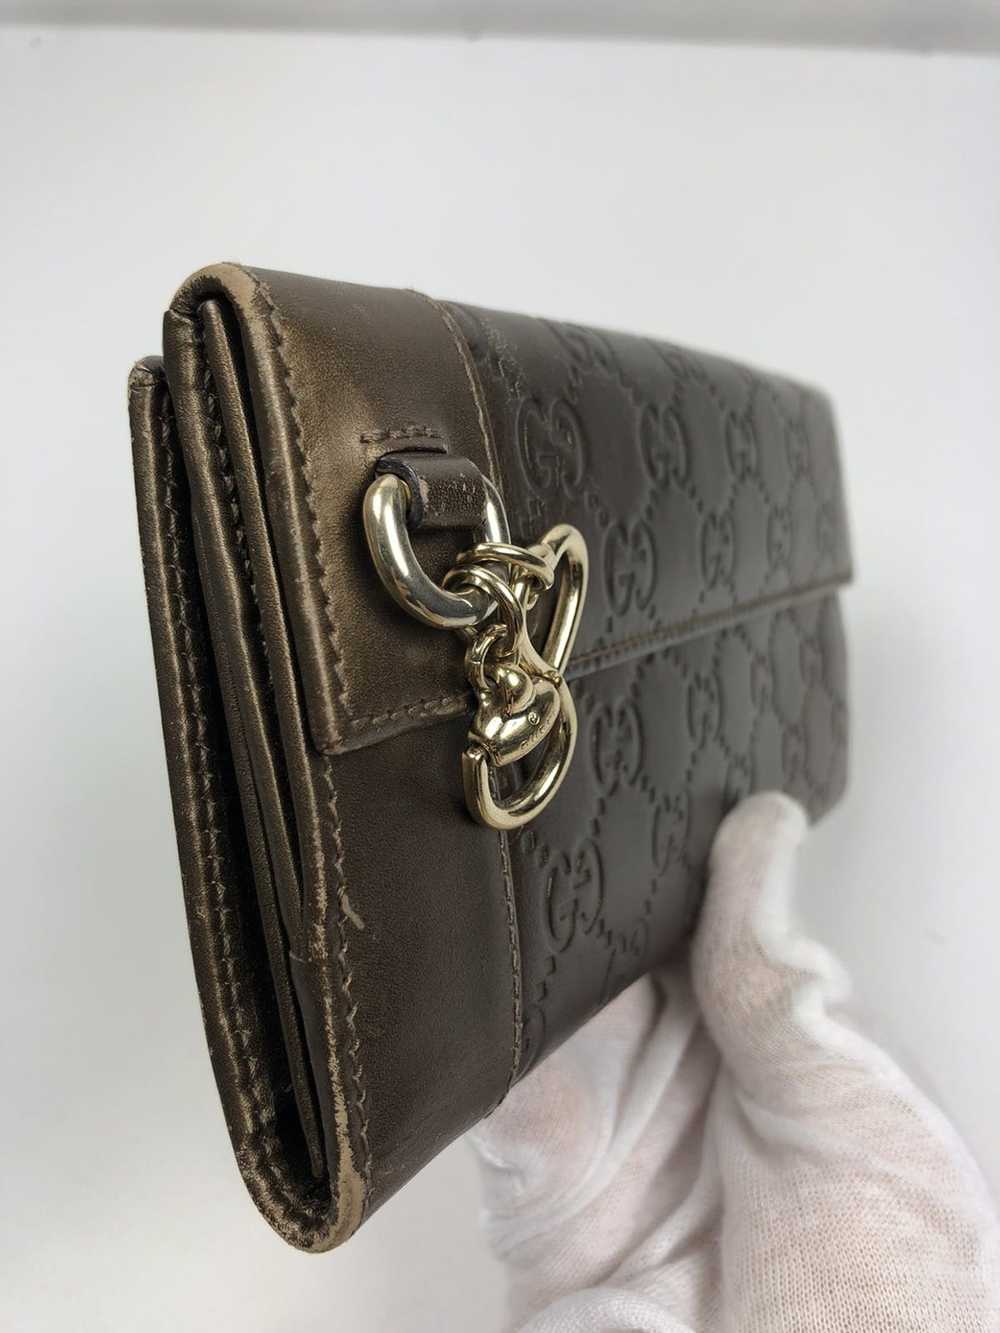 Gucci Gucci gg guccissima leather long wallet - image 8